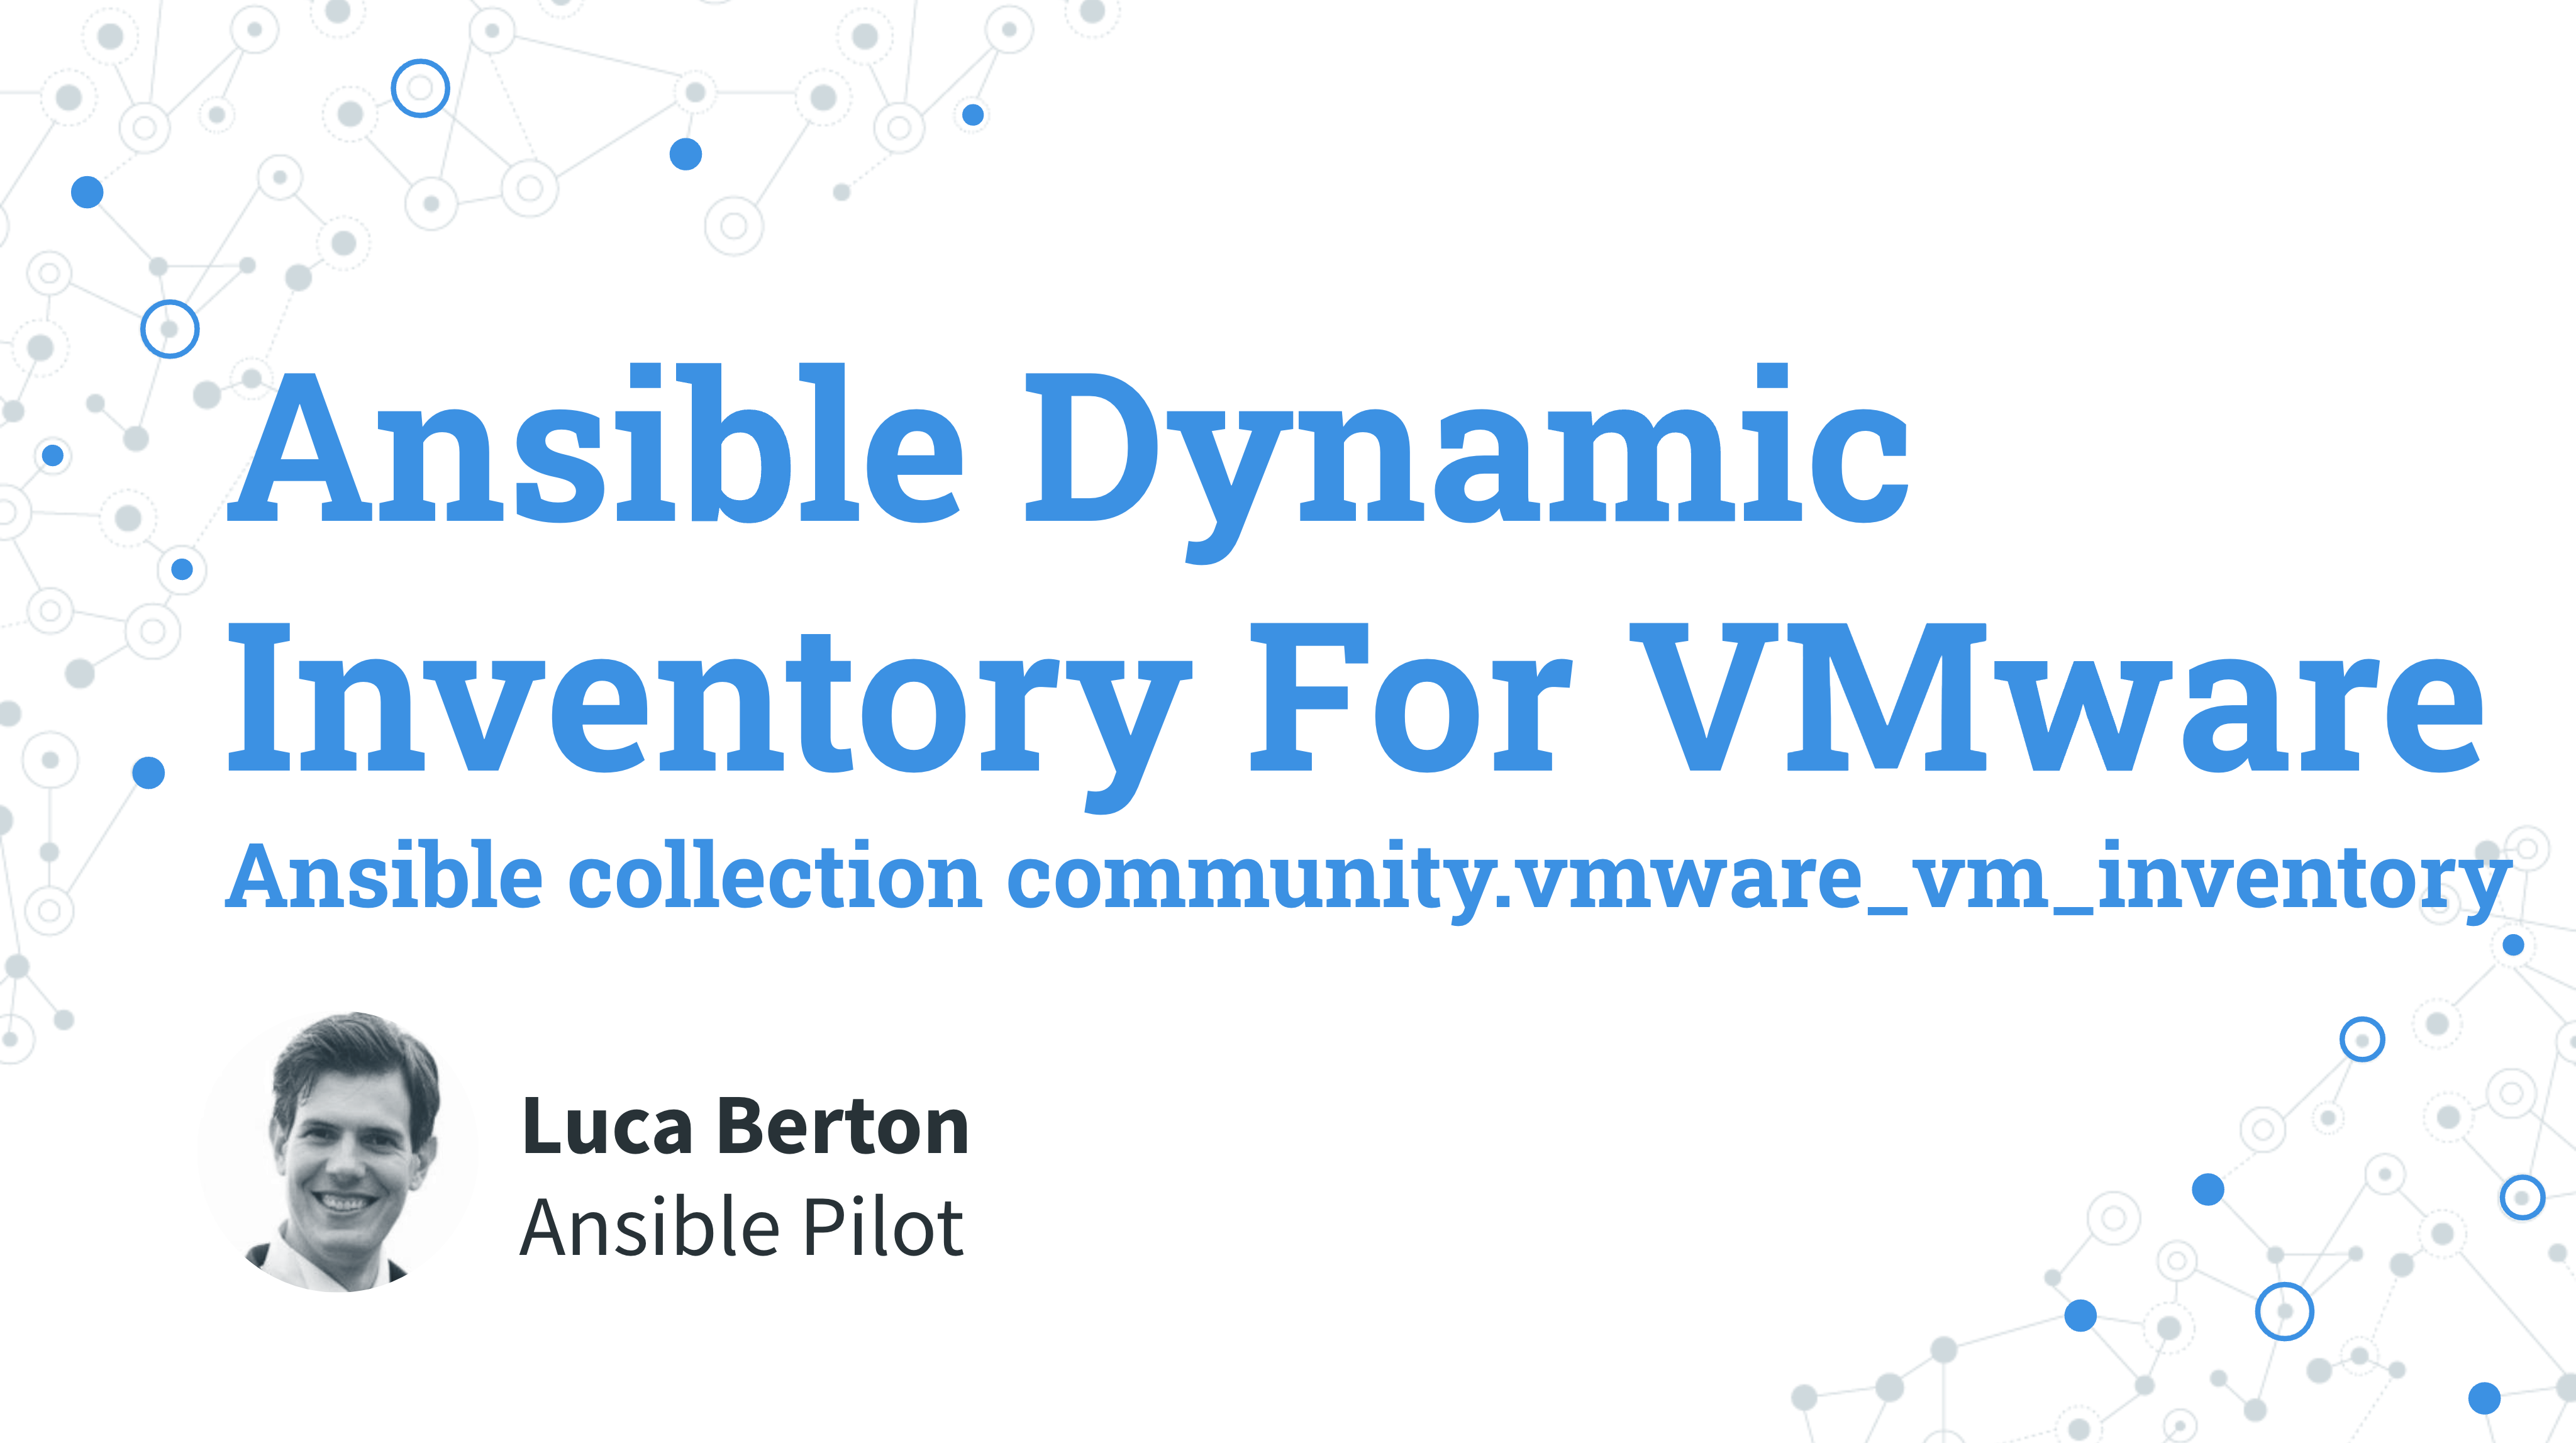 Ansible Dynamic Inventory For VMware - Ansible vmware_vm_inventory